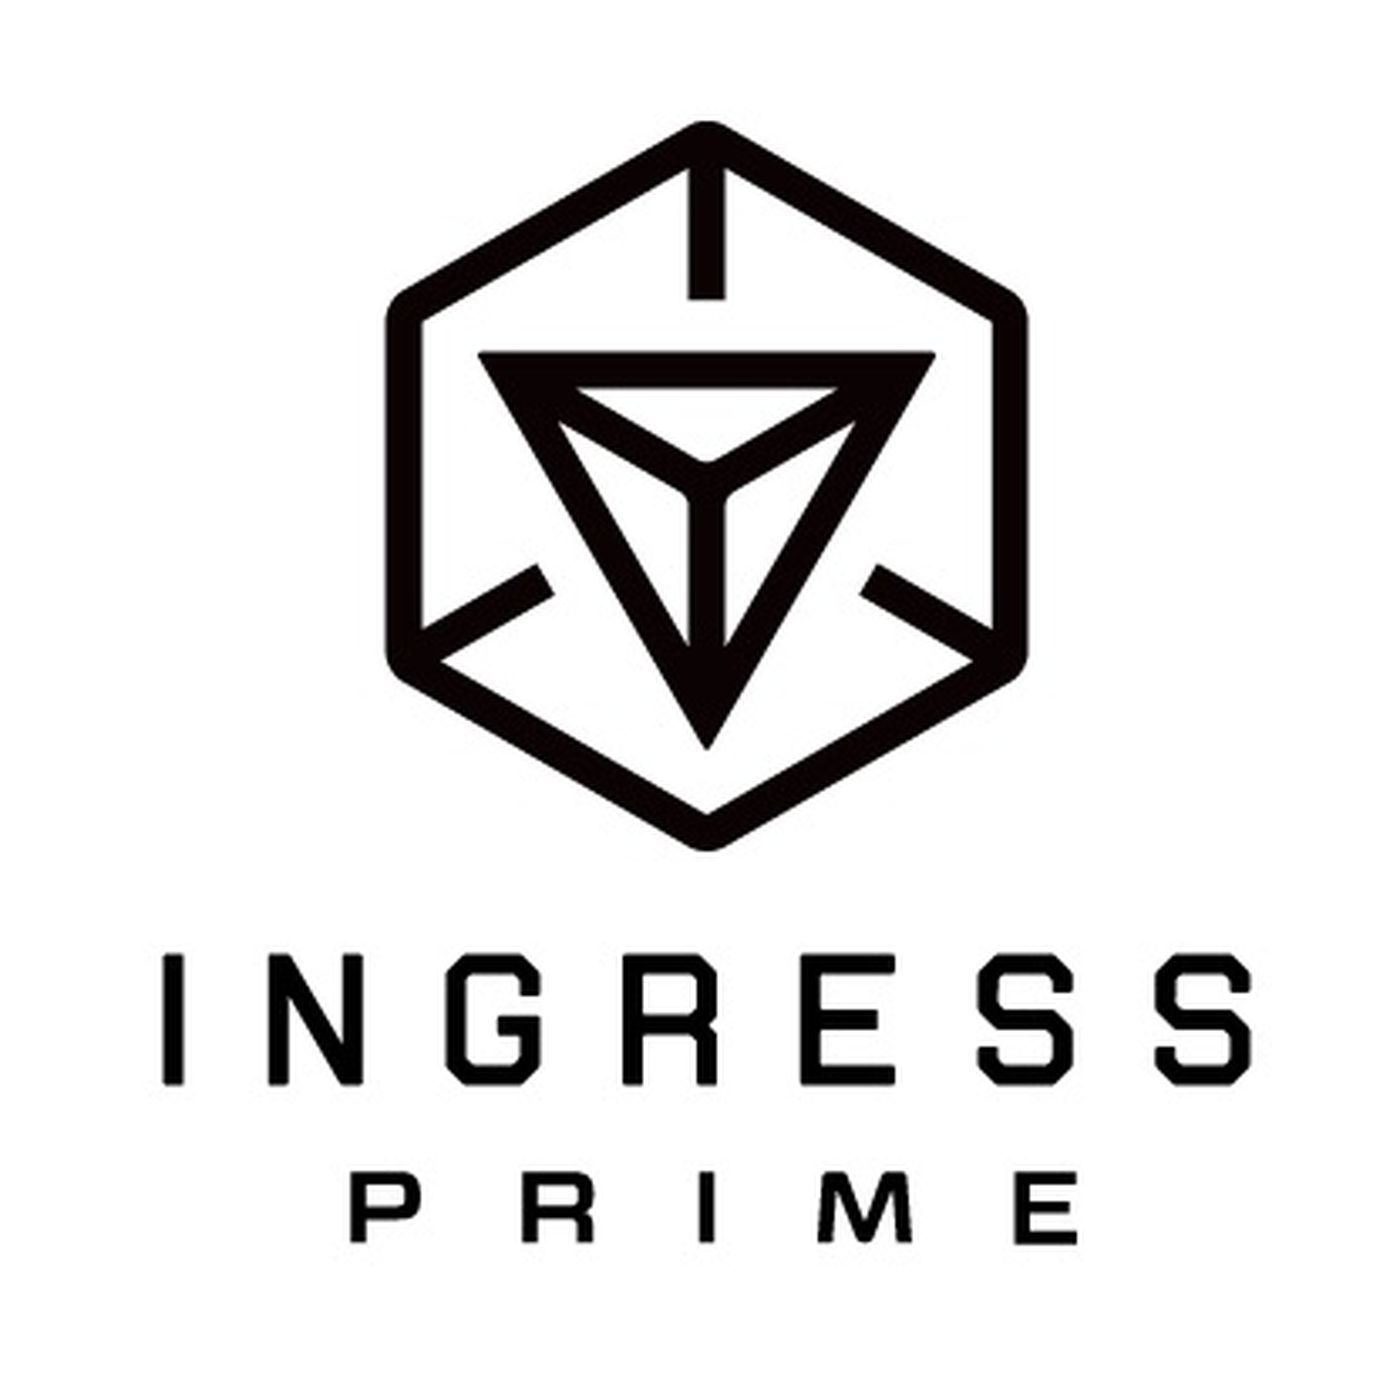 Ingress Prime gets a major update this 2018 after six long years